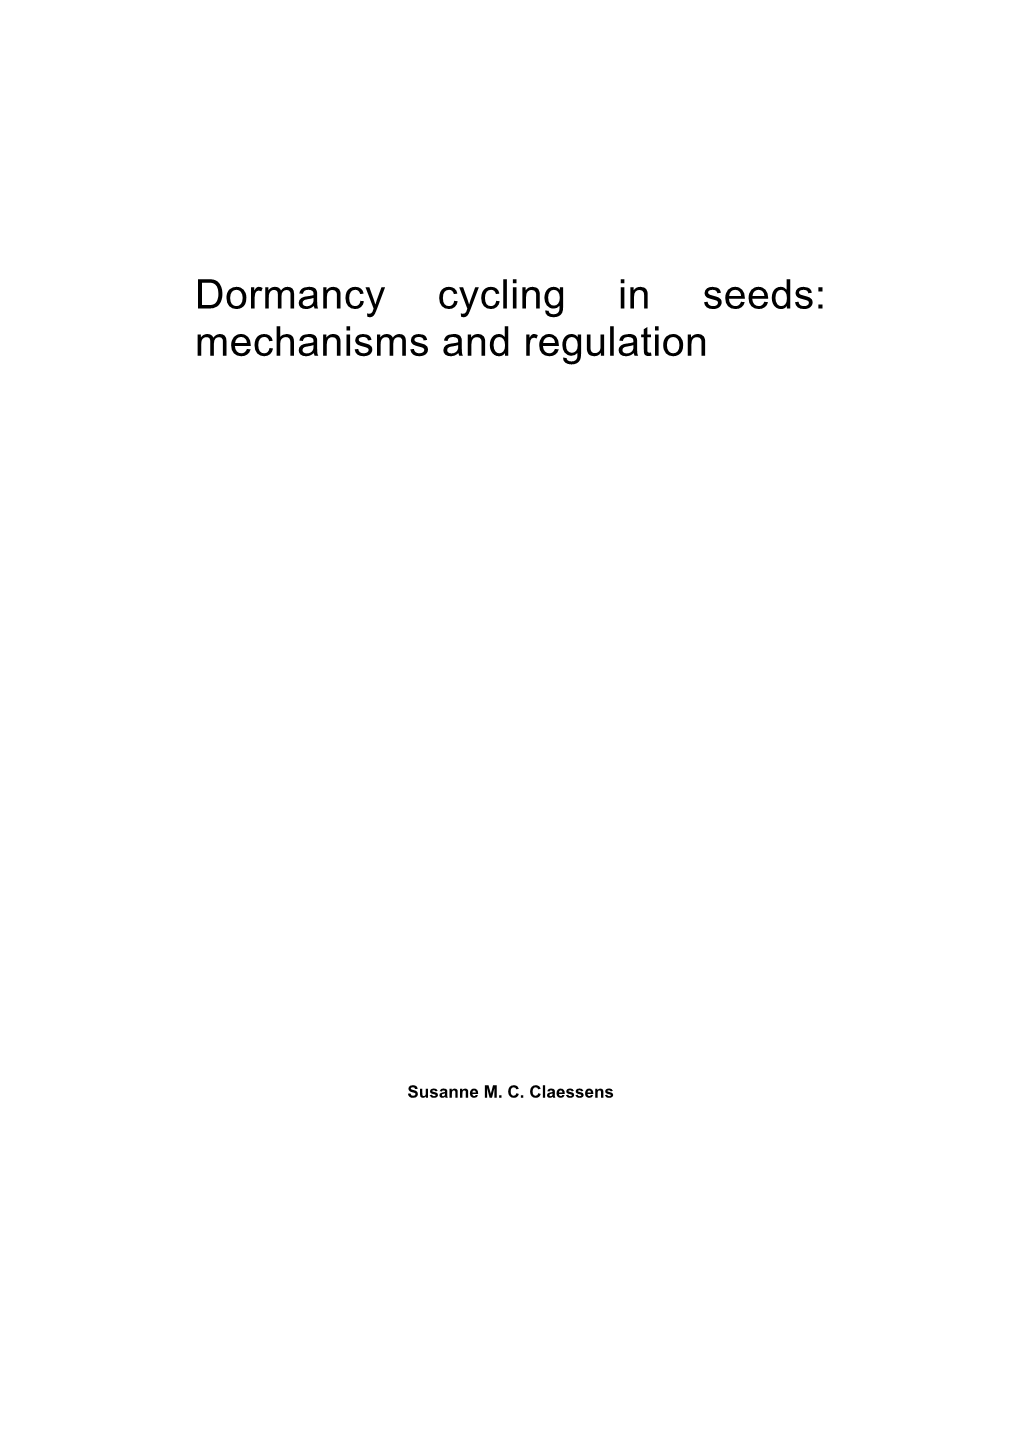 Dormancy Cycling in Seeds: Mechanisms and Regulation